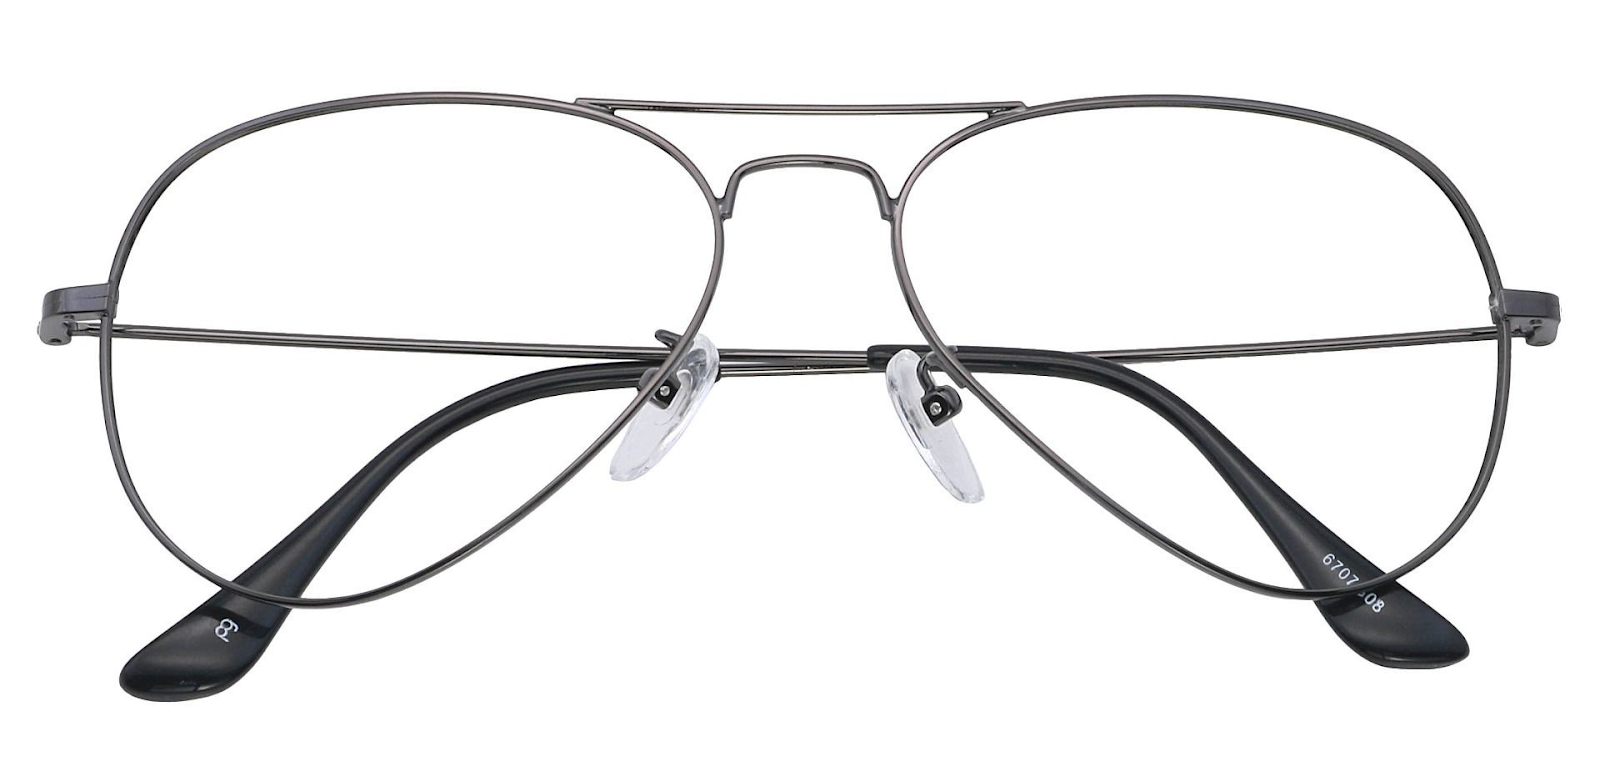 A pair of aviator-style glasses.